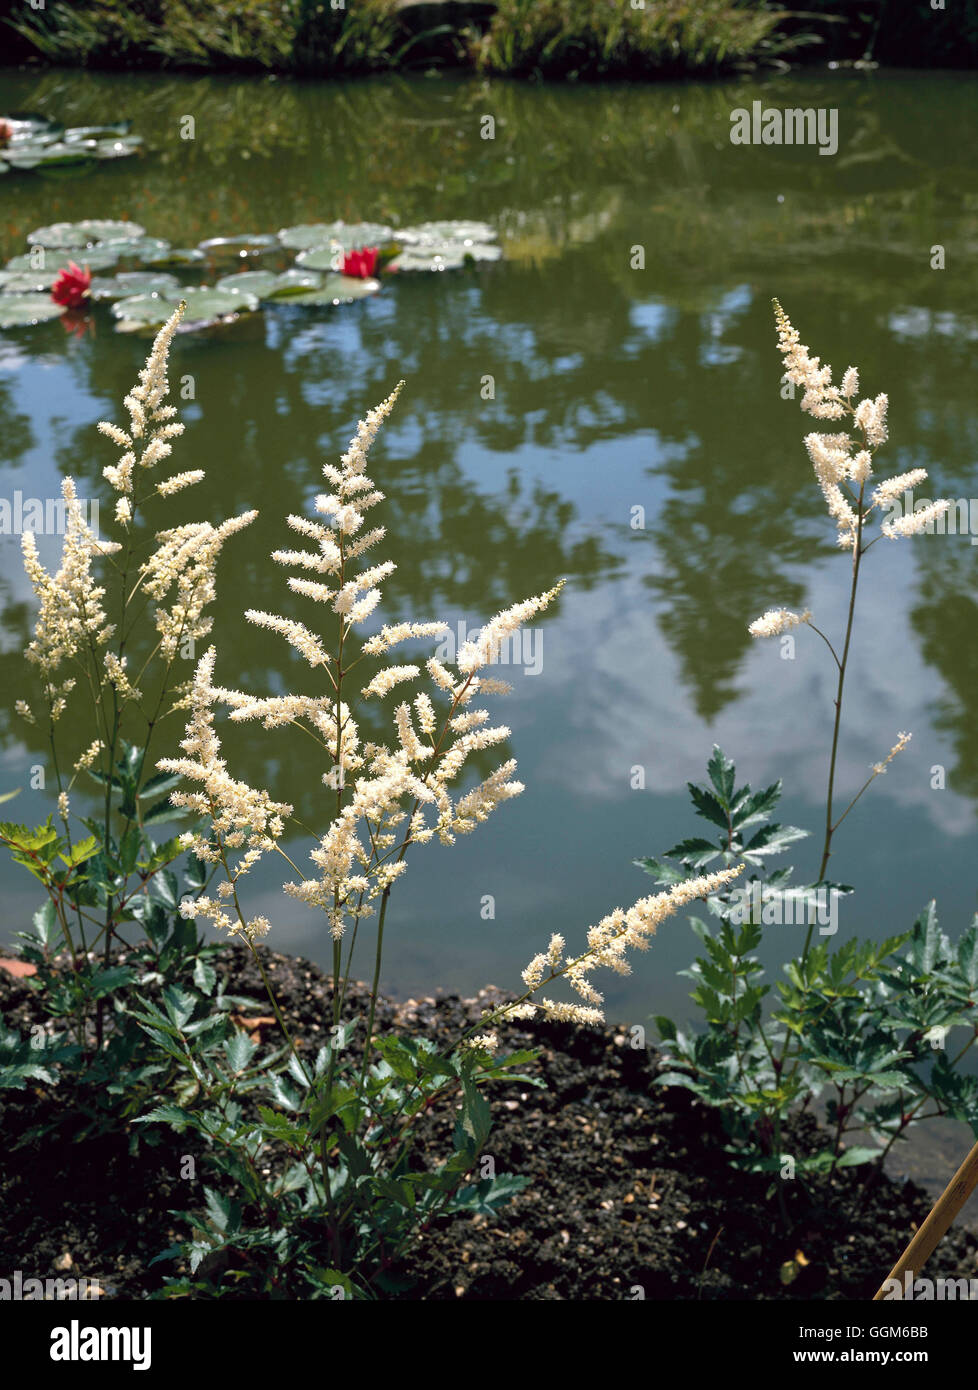 Title Page - Pool with Astilbe x arendsii 'Irrlicht' in foreground   TIT086264     Photos Horticultu Stock Photo